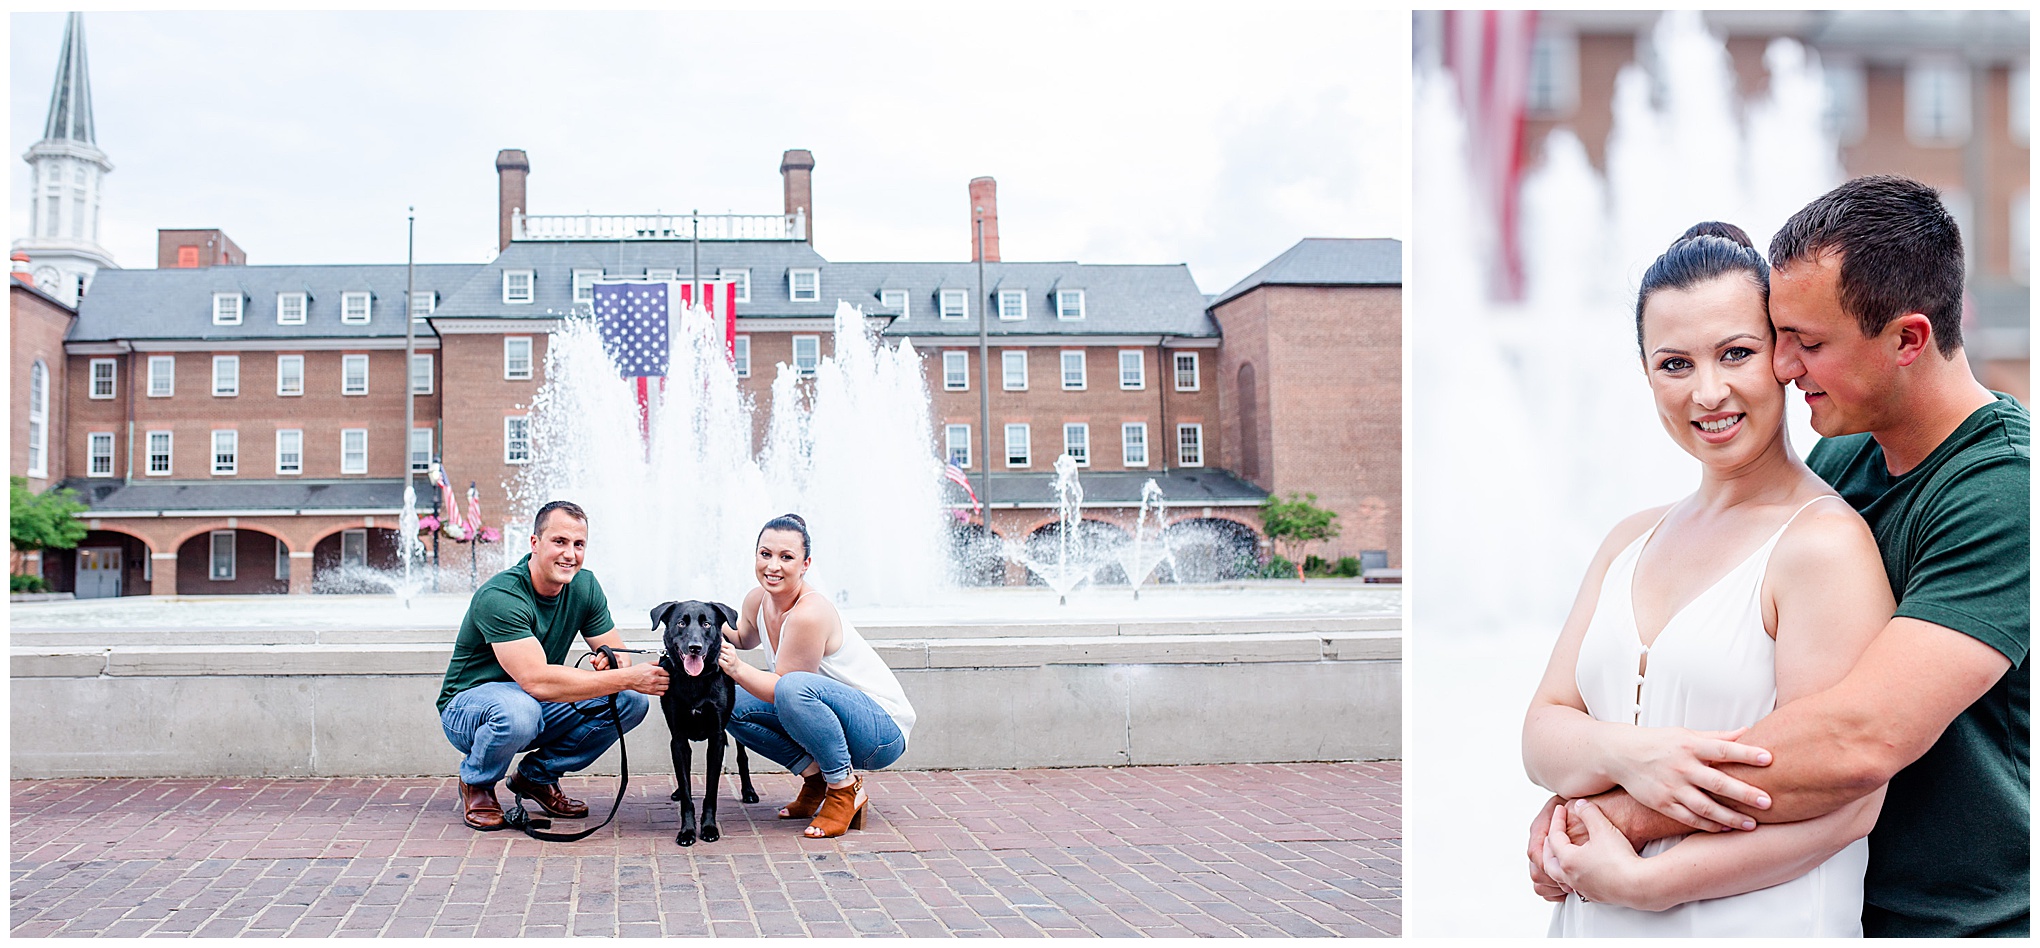 Carlyle House engagement photos, Carlyle House, Alexandria engagement photos, Old Town Alexandria engagement photos, Old Town Alexandria, Alexandria engagement photos, Alexandria Virginia, classic engagement photos, historic homes engagement photos, casual engagement photos, Rachel E.H. Photography, engagement photos with dog